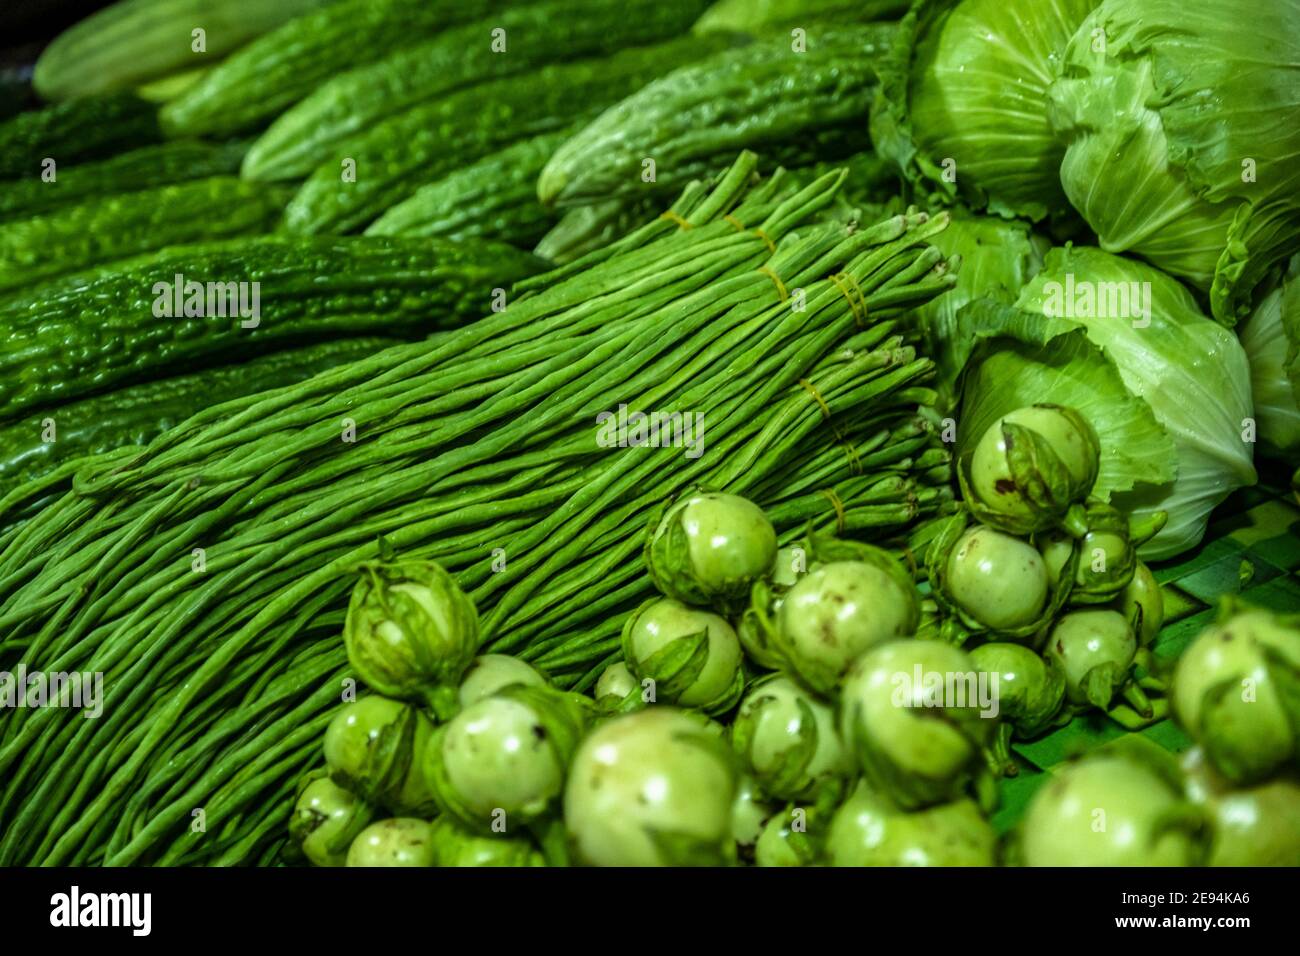 Close-up of fresh vegetables / greens / cabbages, eggplants and yardlong beans at the Centrale Markt / central market in Paramaribo, Suriname Stock Photo